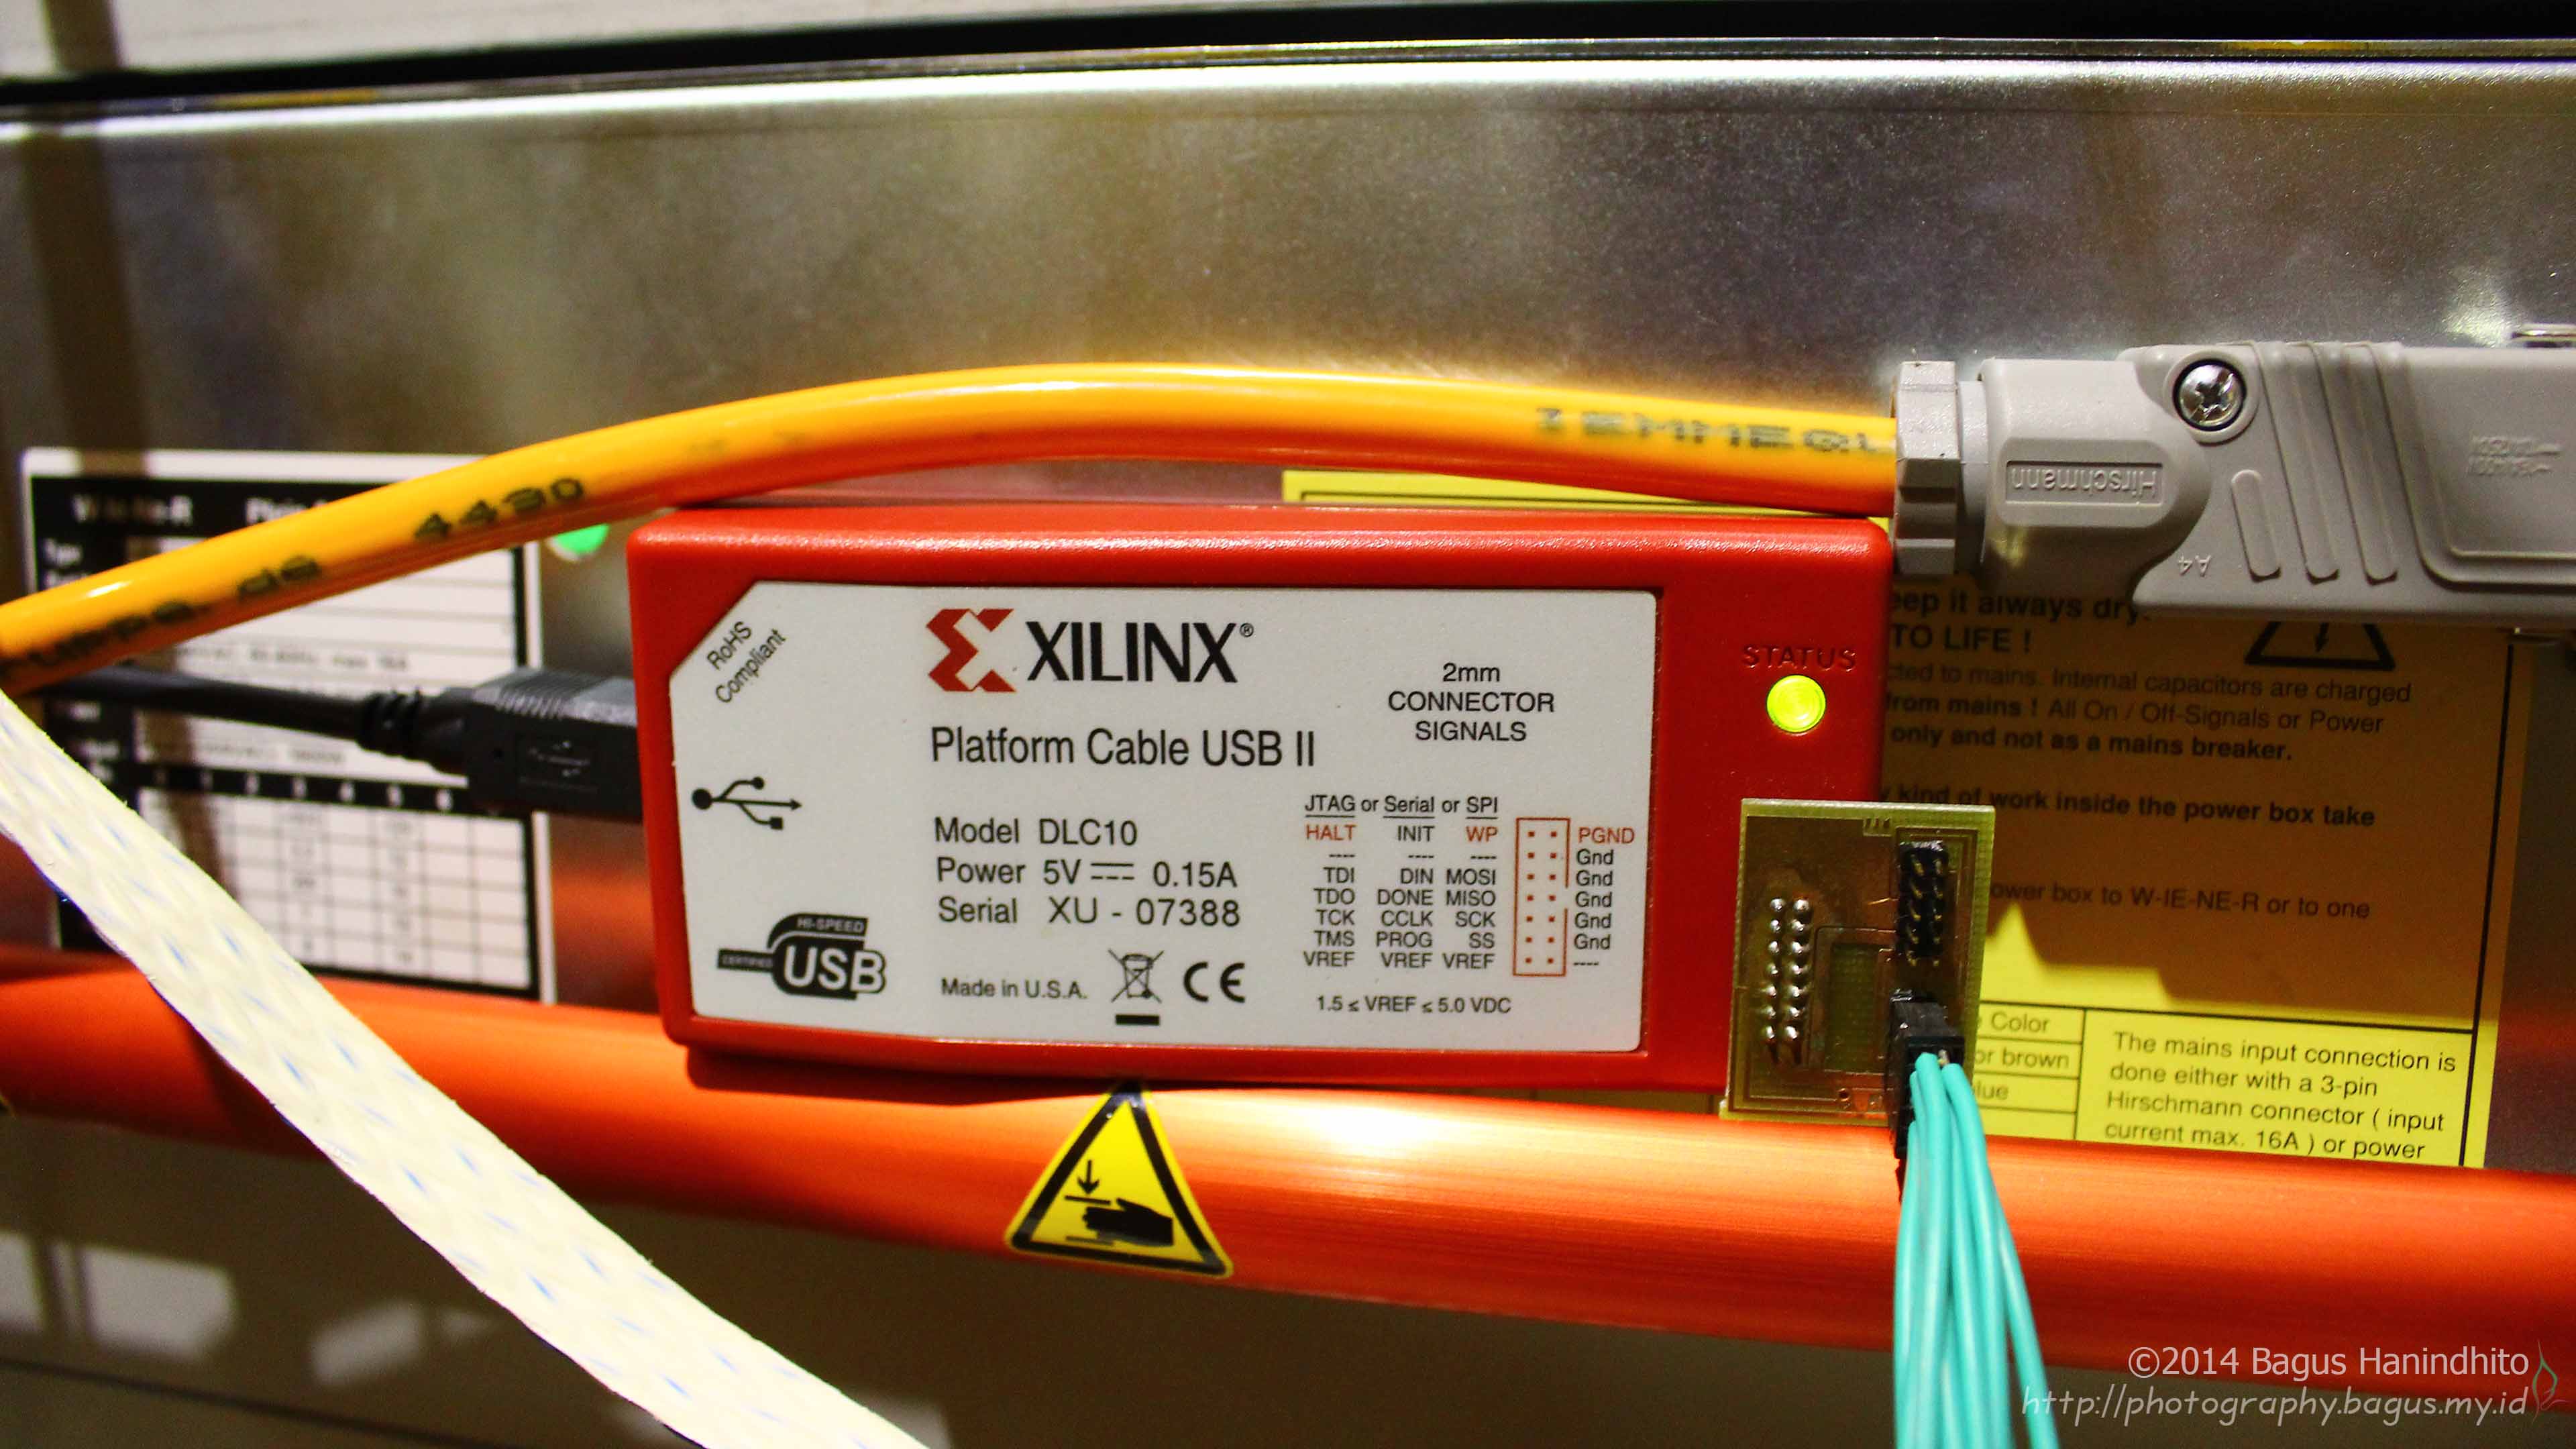 XILINX Platform Cable is used during debugging and testing both of the ROD and BOC via JTAG interface.